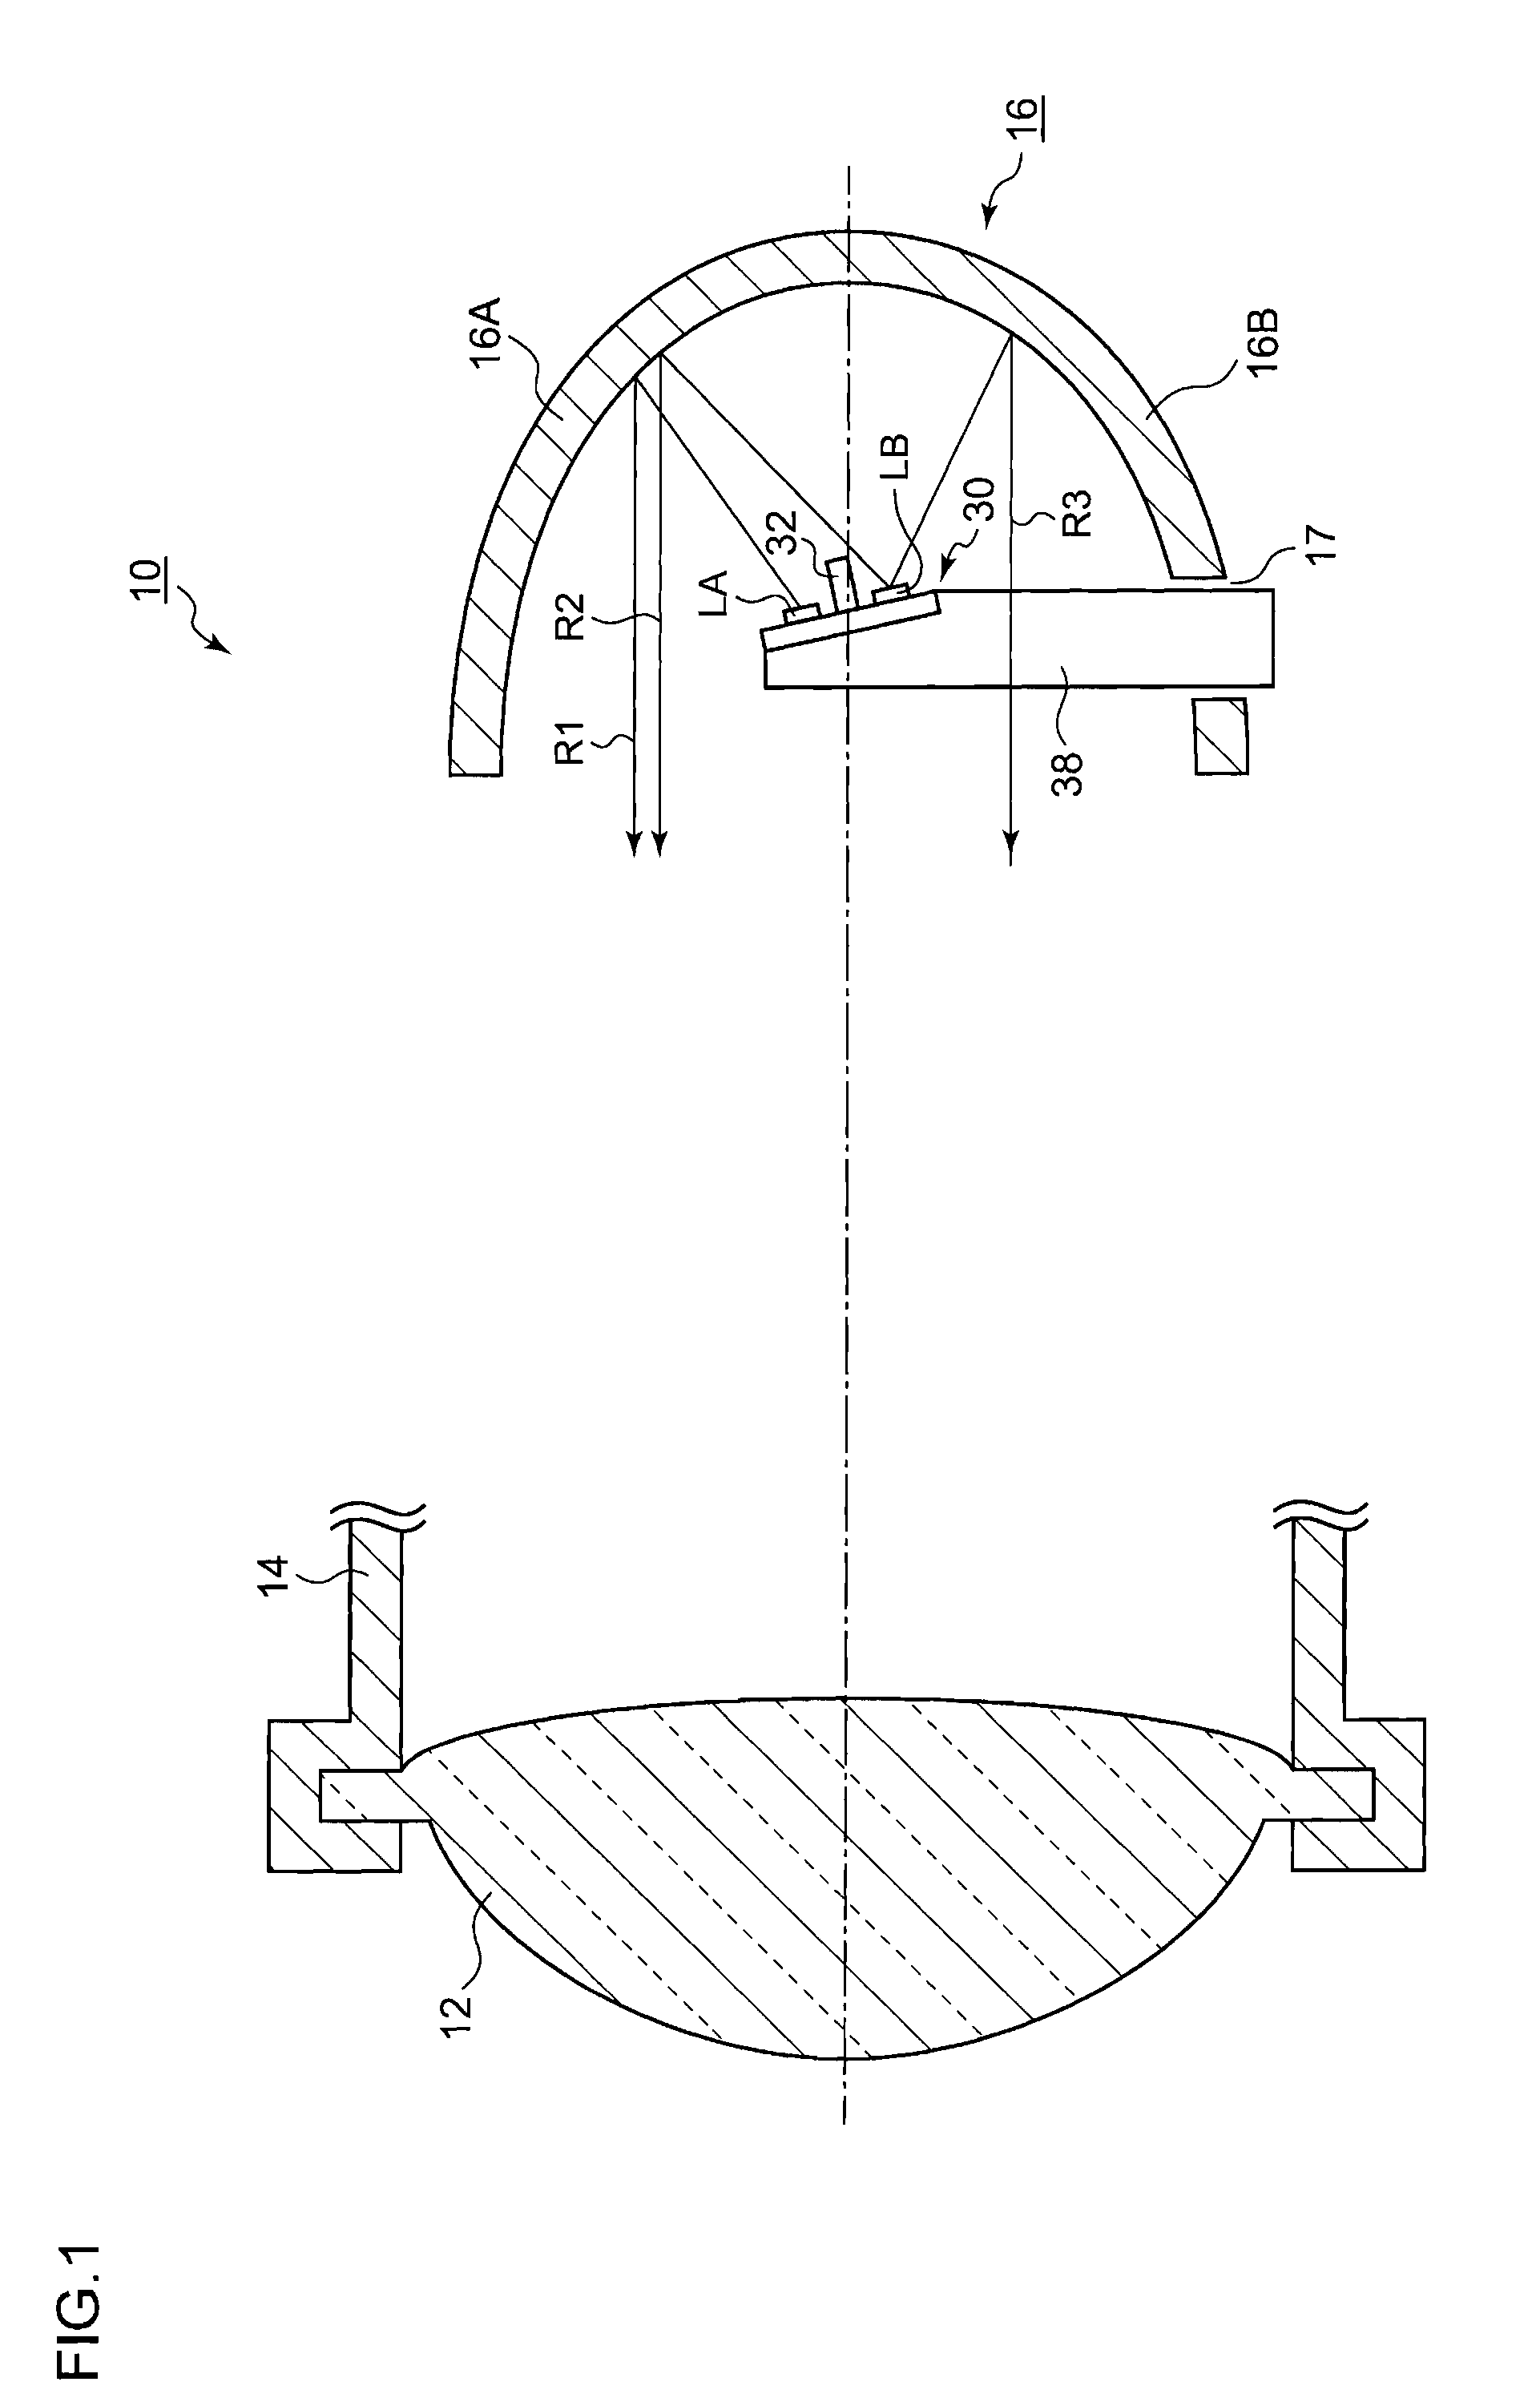 Automotive headlamp forming multiple light distribution patterns with a single lamp